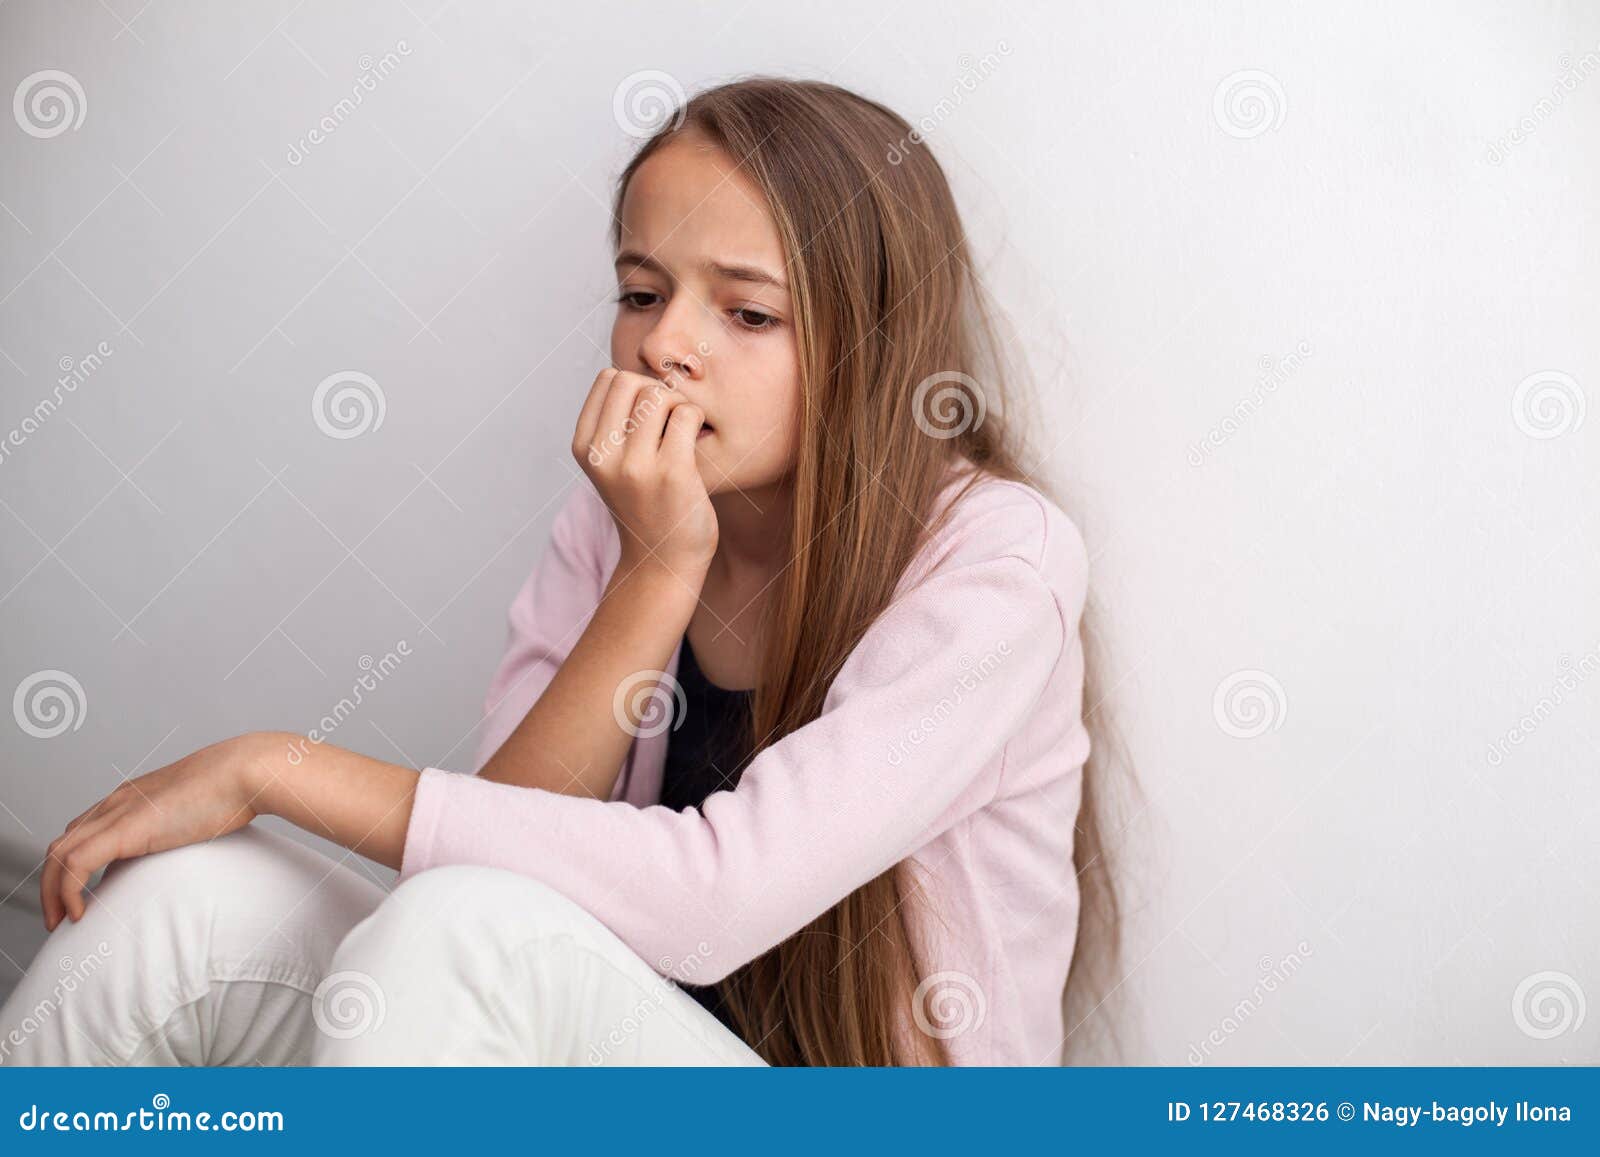 511 Girl Biting Her Nails Stock Photos - Free & Royalty-Free Stock Photos  from Dreamstime